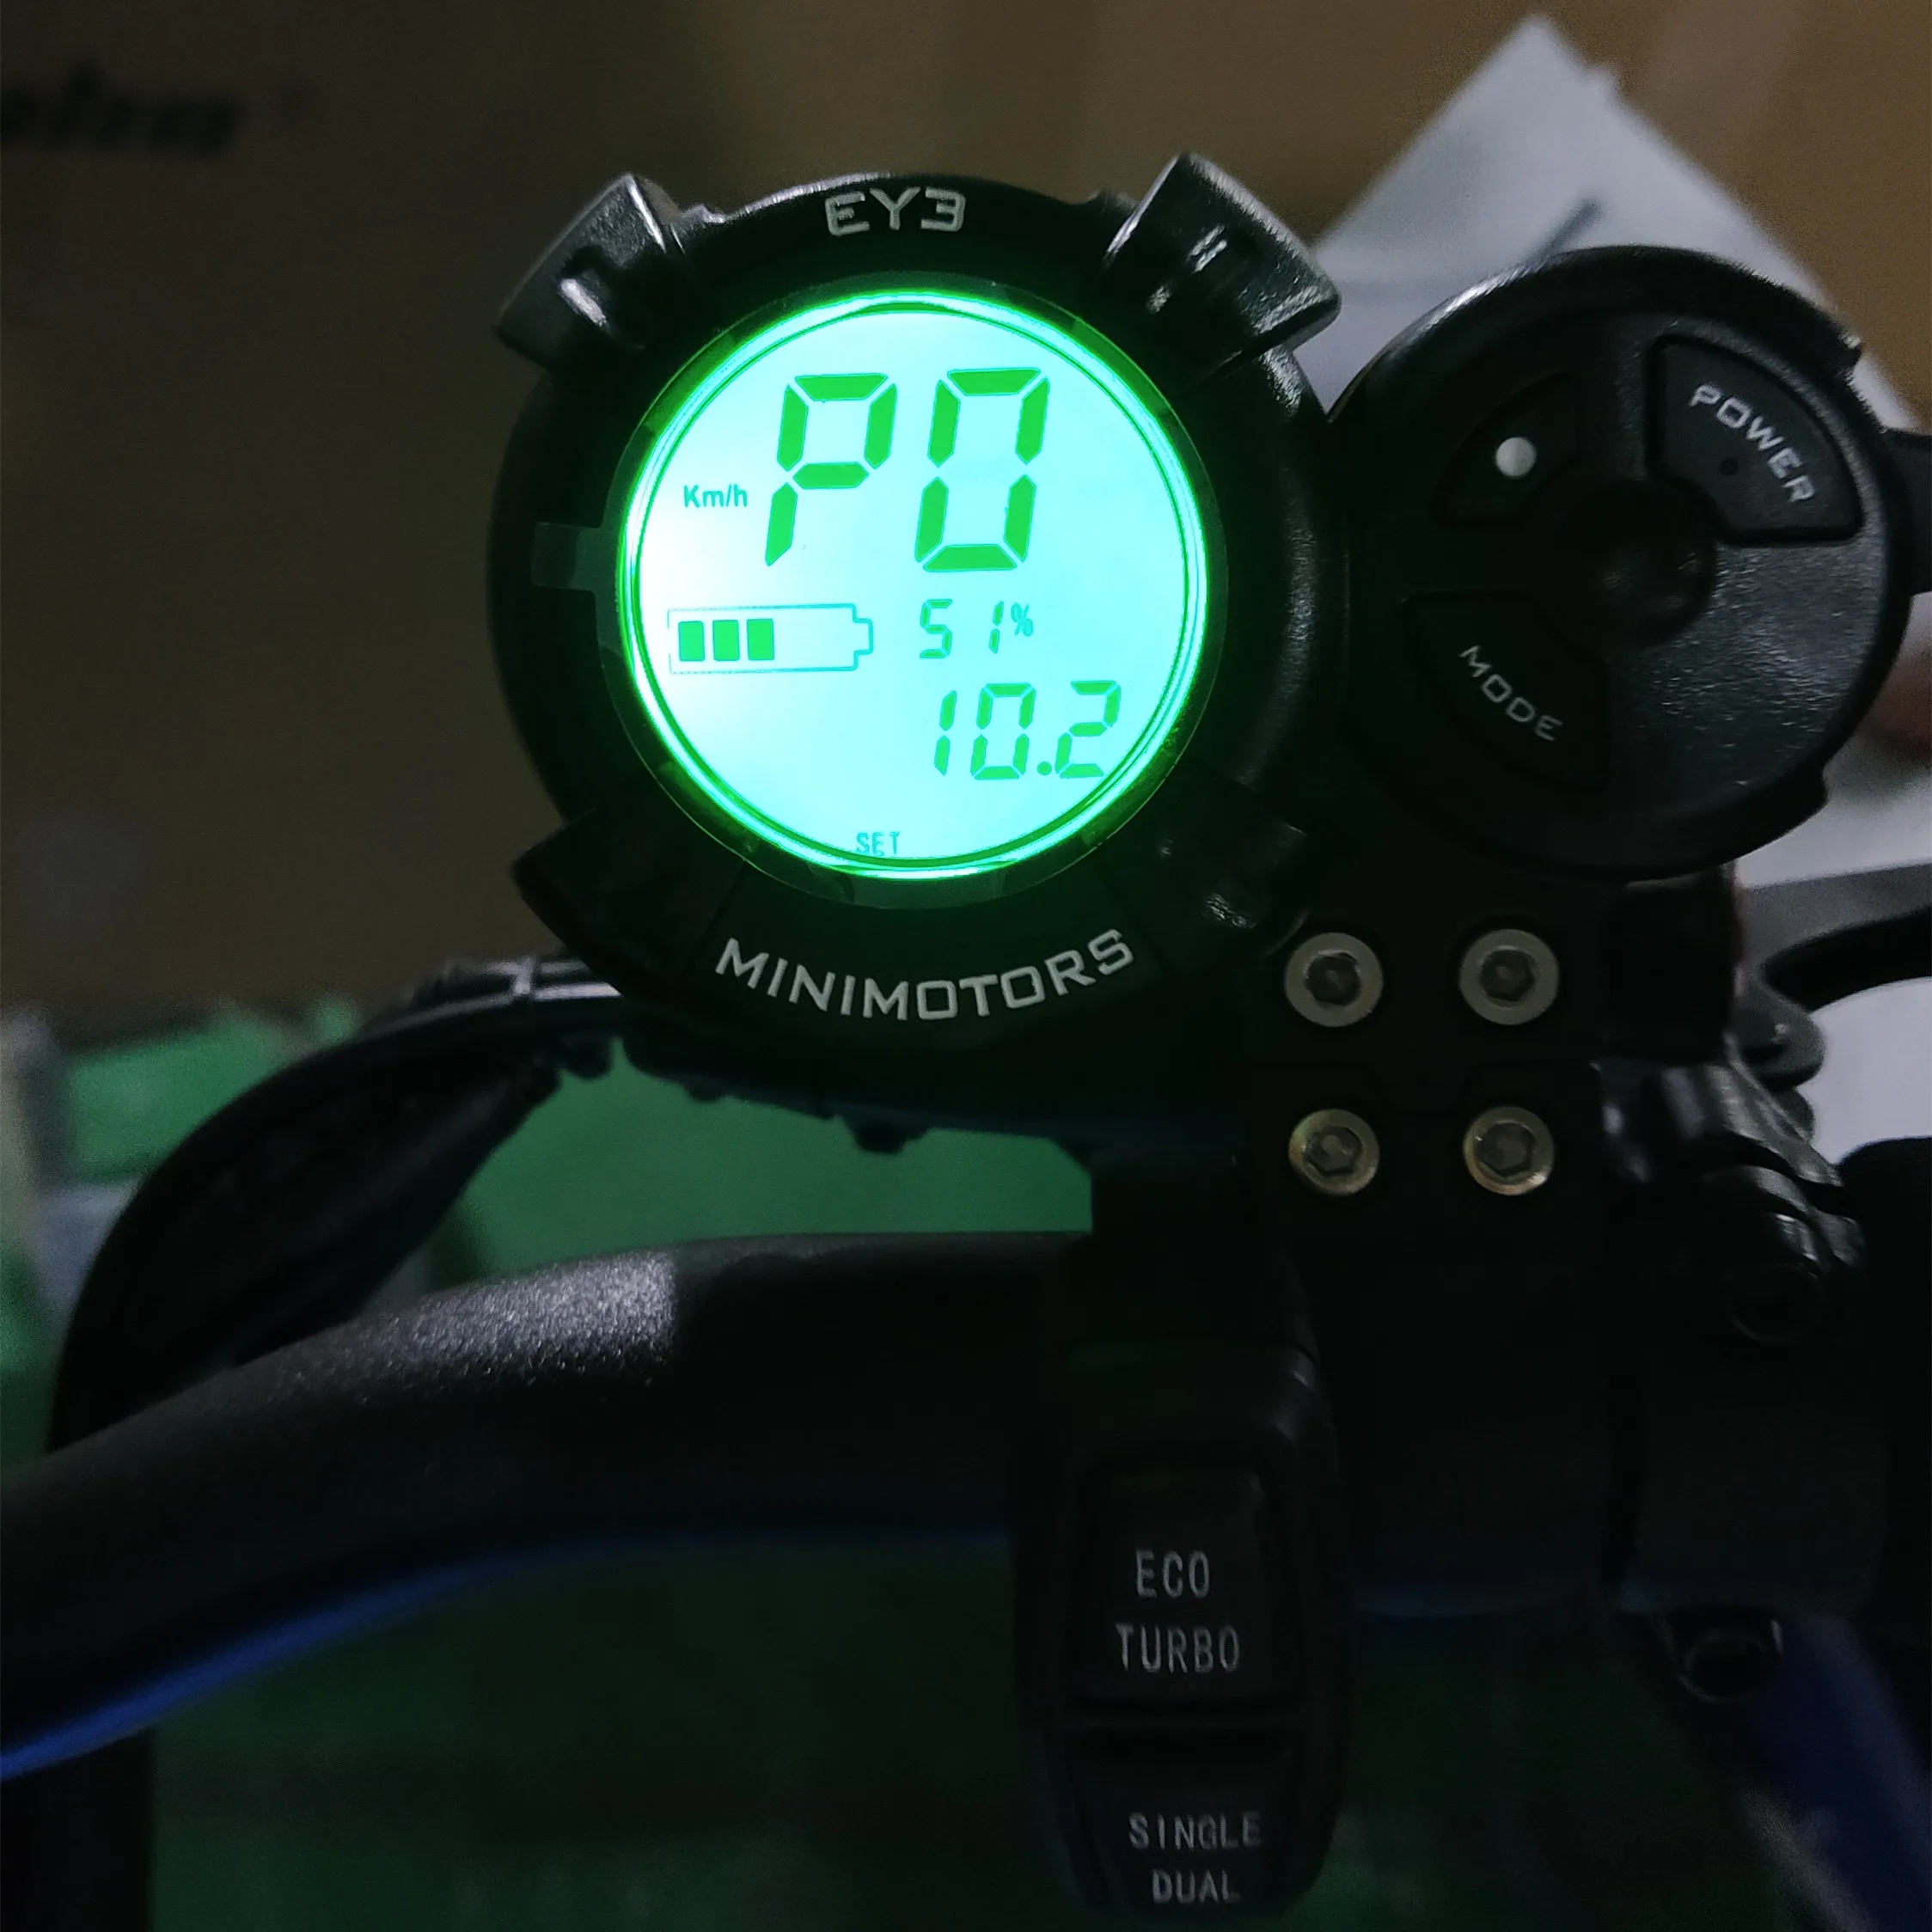 

Kaabo Scooter Wolf Warrior Mantis Minimotor Standard LCD Screen Display Accelerator, Customized